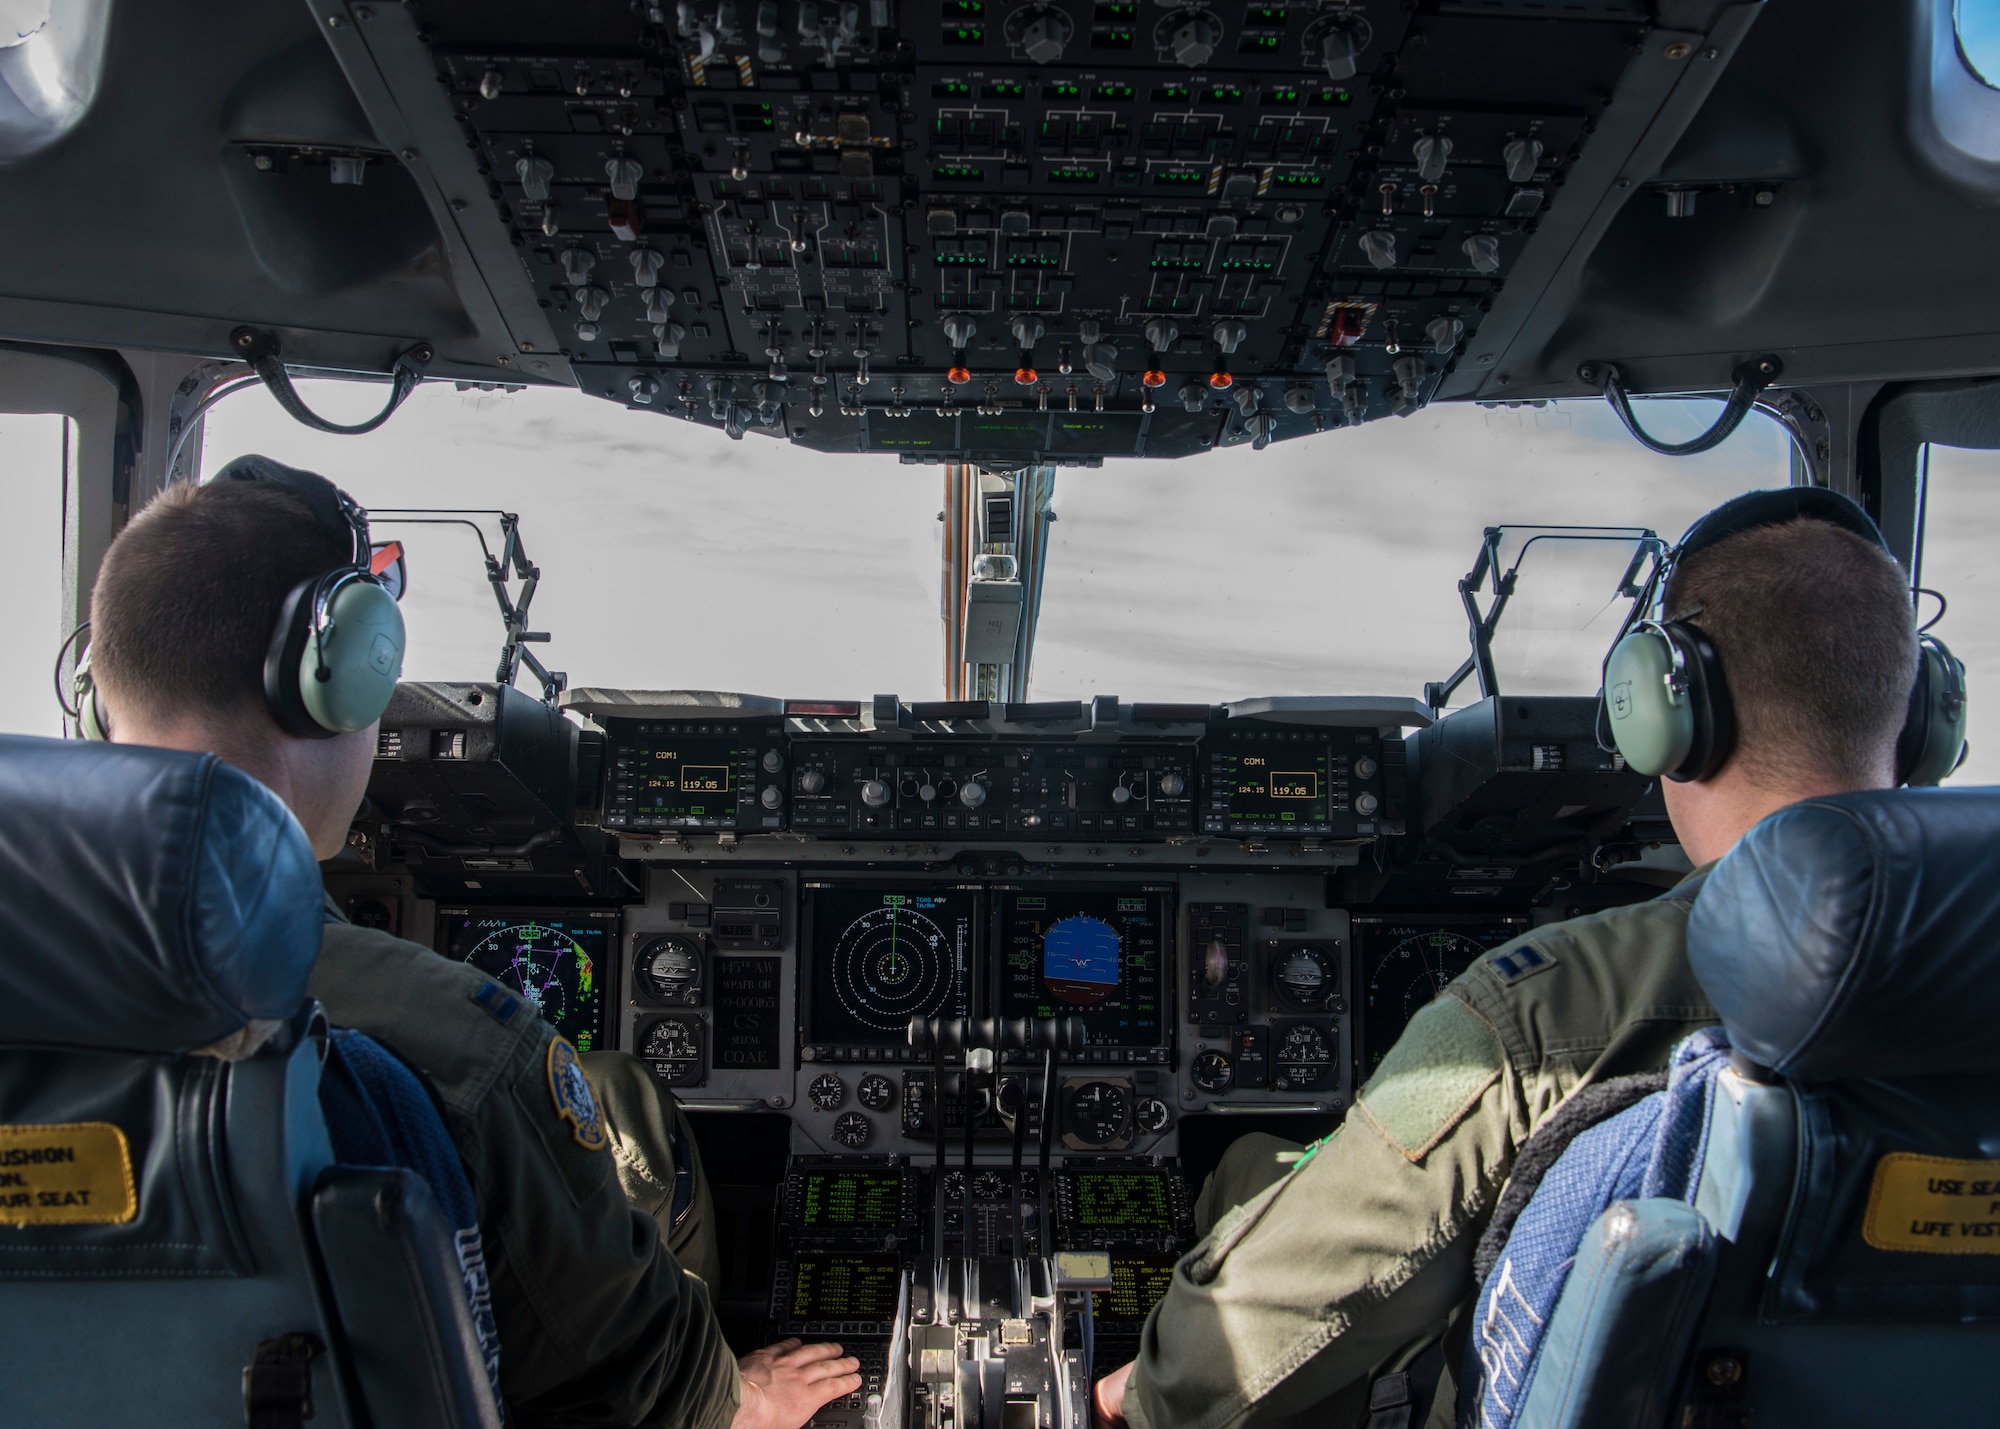 Capt. Jeffrey Anderson and Capt. Jeremiah Brown, 89th Airlift Squadron pilots, operate a C-17 Globemaster III, assigned to Wright-Patterson Air Force Base, Ohio, during exercise Patriot Hook 2019, April 11, 2019, at Vandenberg Air Force Base, Calif. The C-17 is operated by a three-man crew, consisting of a pilot, co-pilot and loadmaster to reduce manpower requirements, risk exposure and long-term operating costs. (U.S. Air Force photo by Airman 1st Class Aubree Milks)